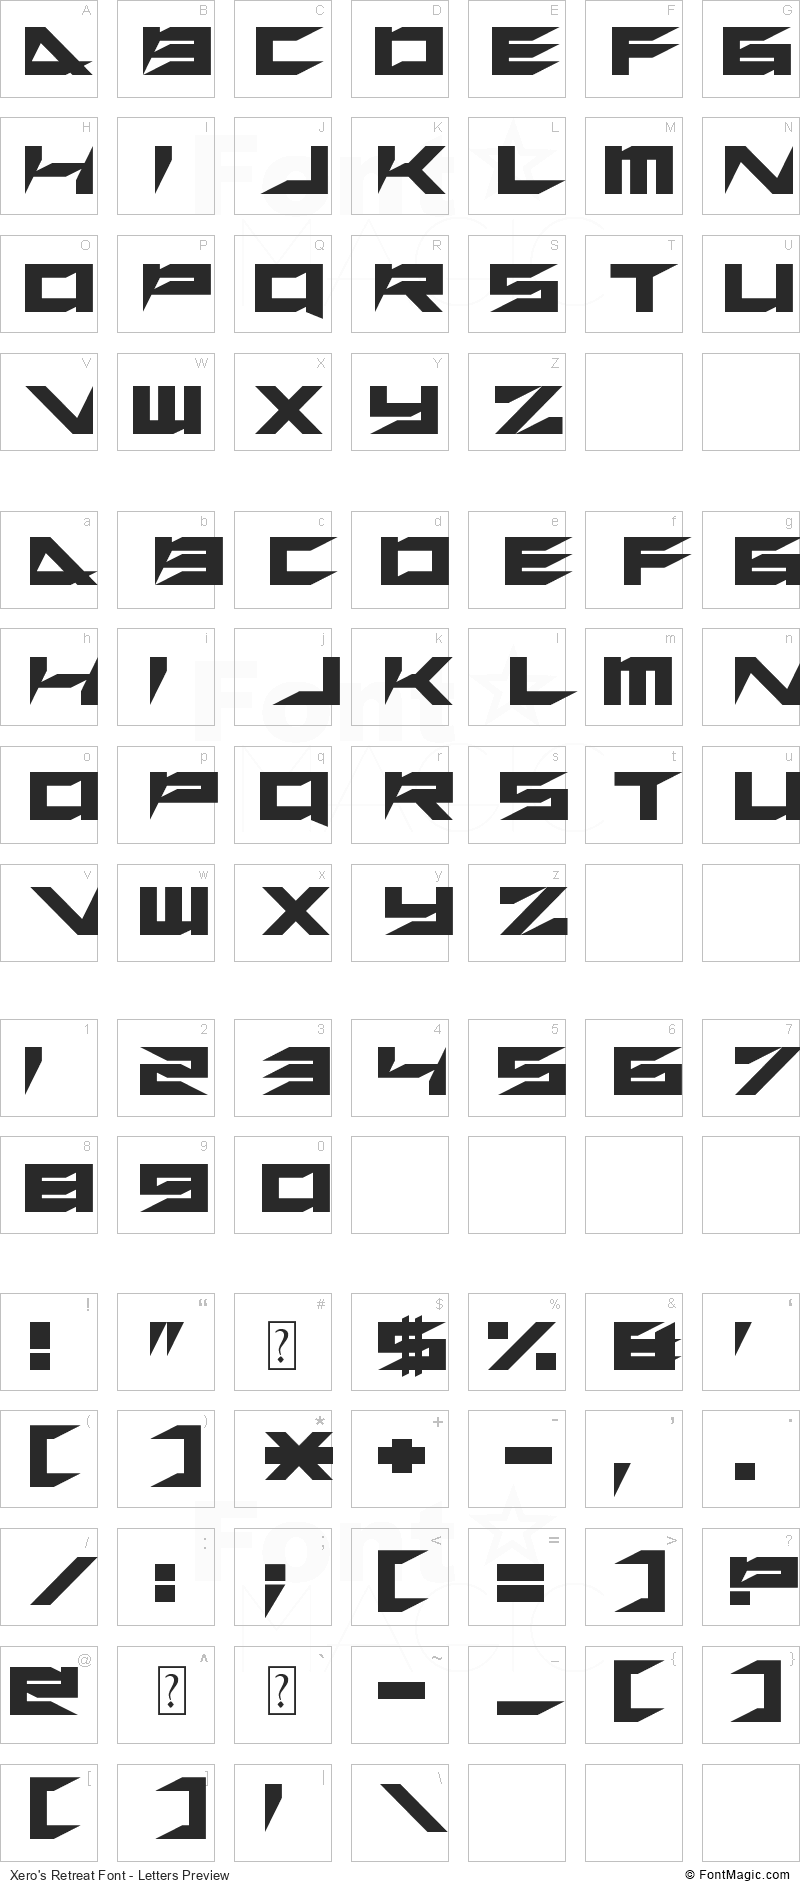 Xero’s Retreat Font - All Latters Preview Chart